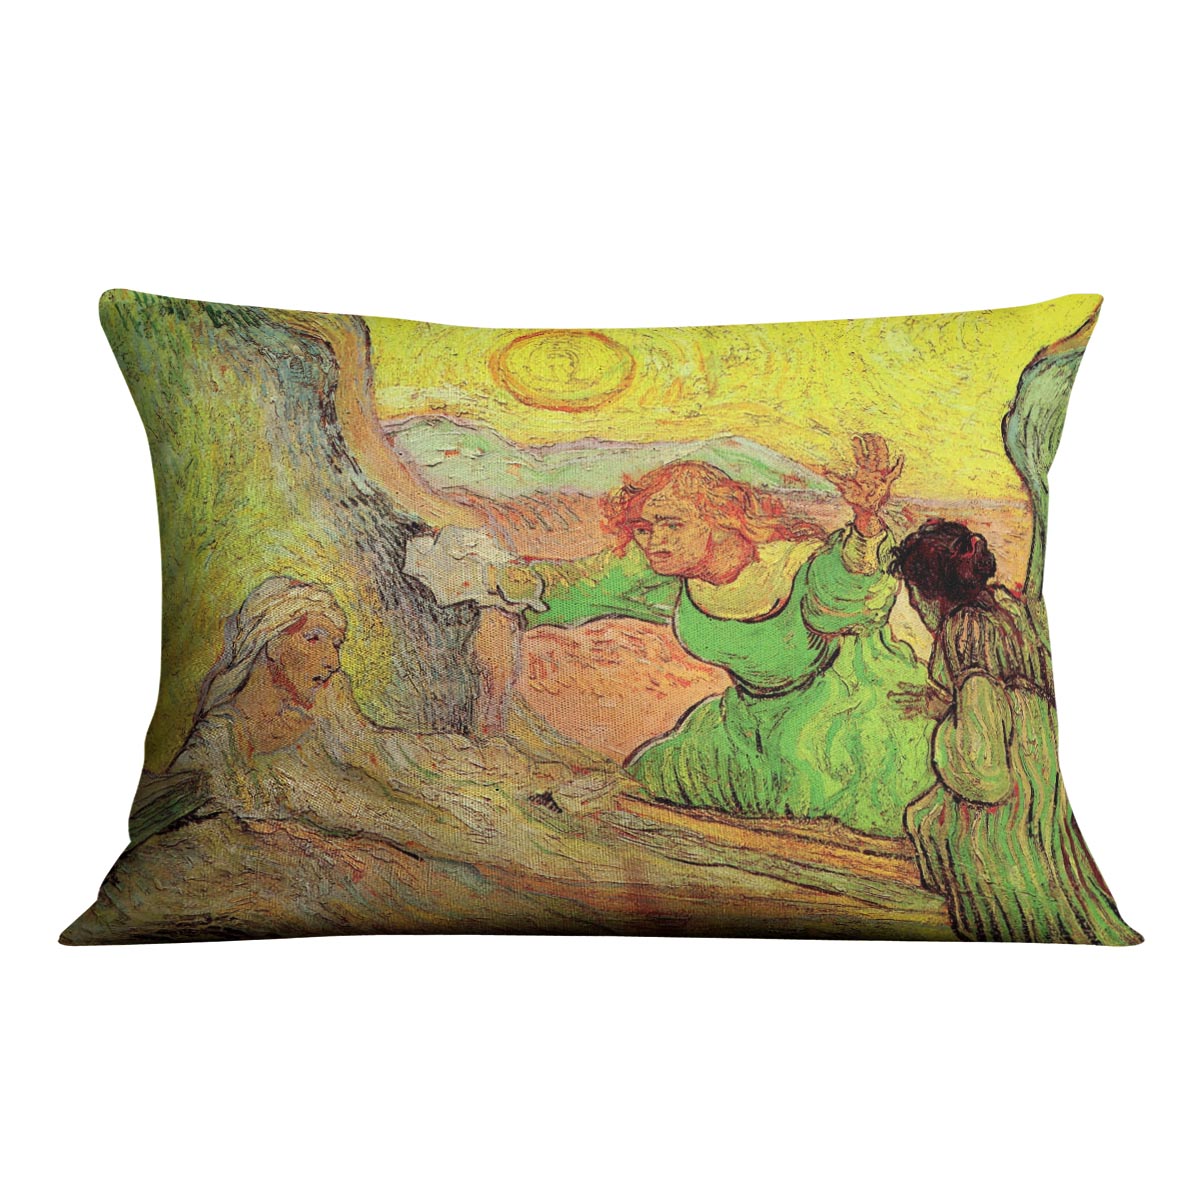 The Raising of Lazarus after Rembrandt by Van Gogh Cushion